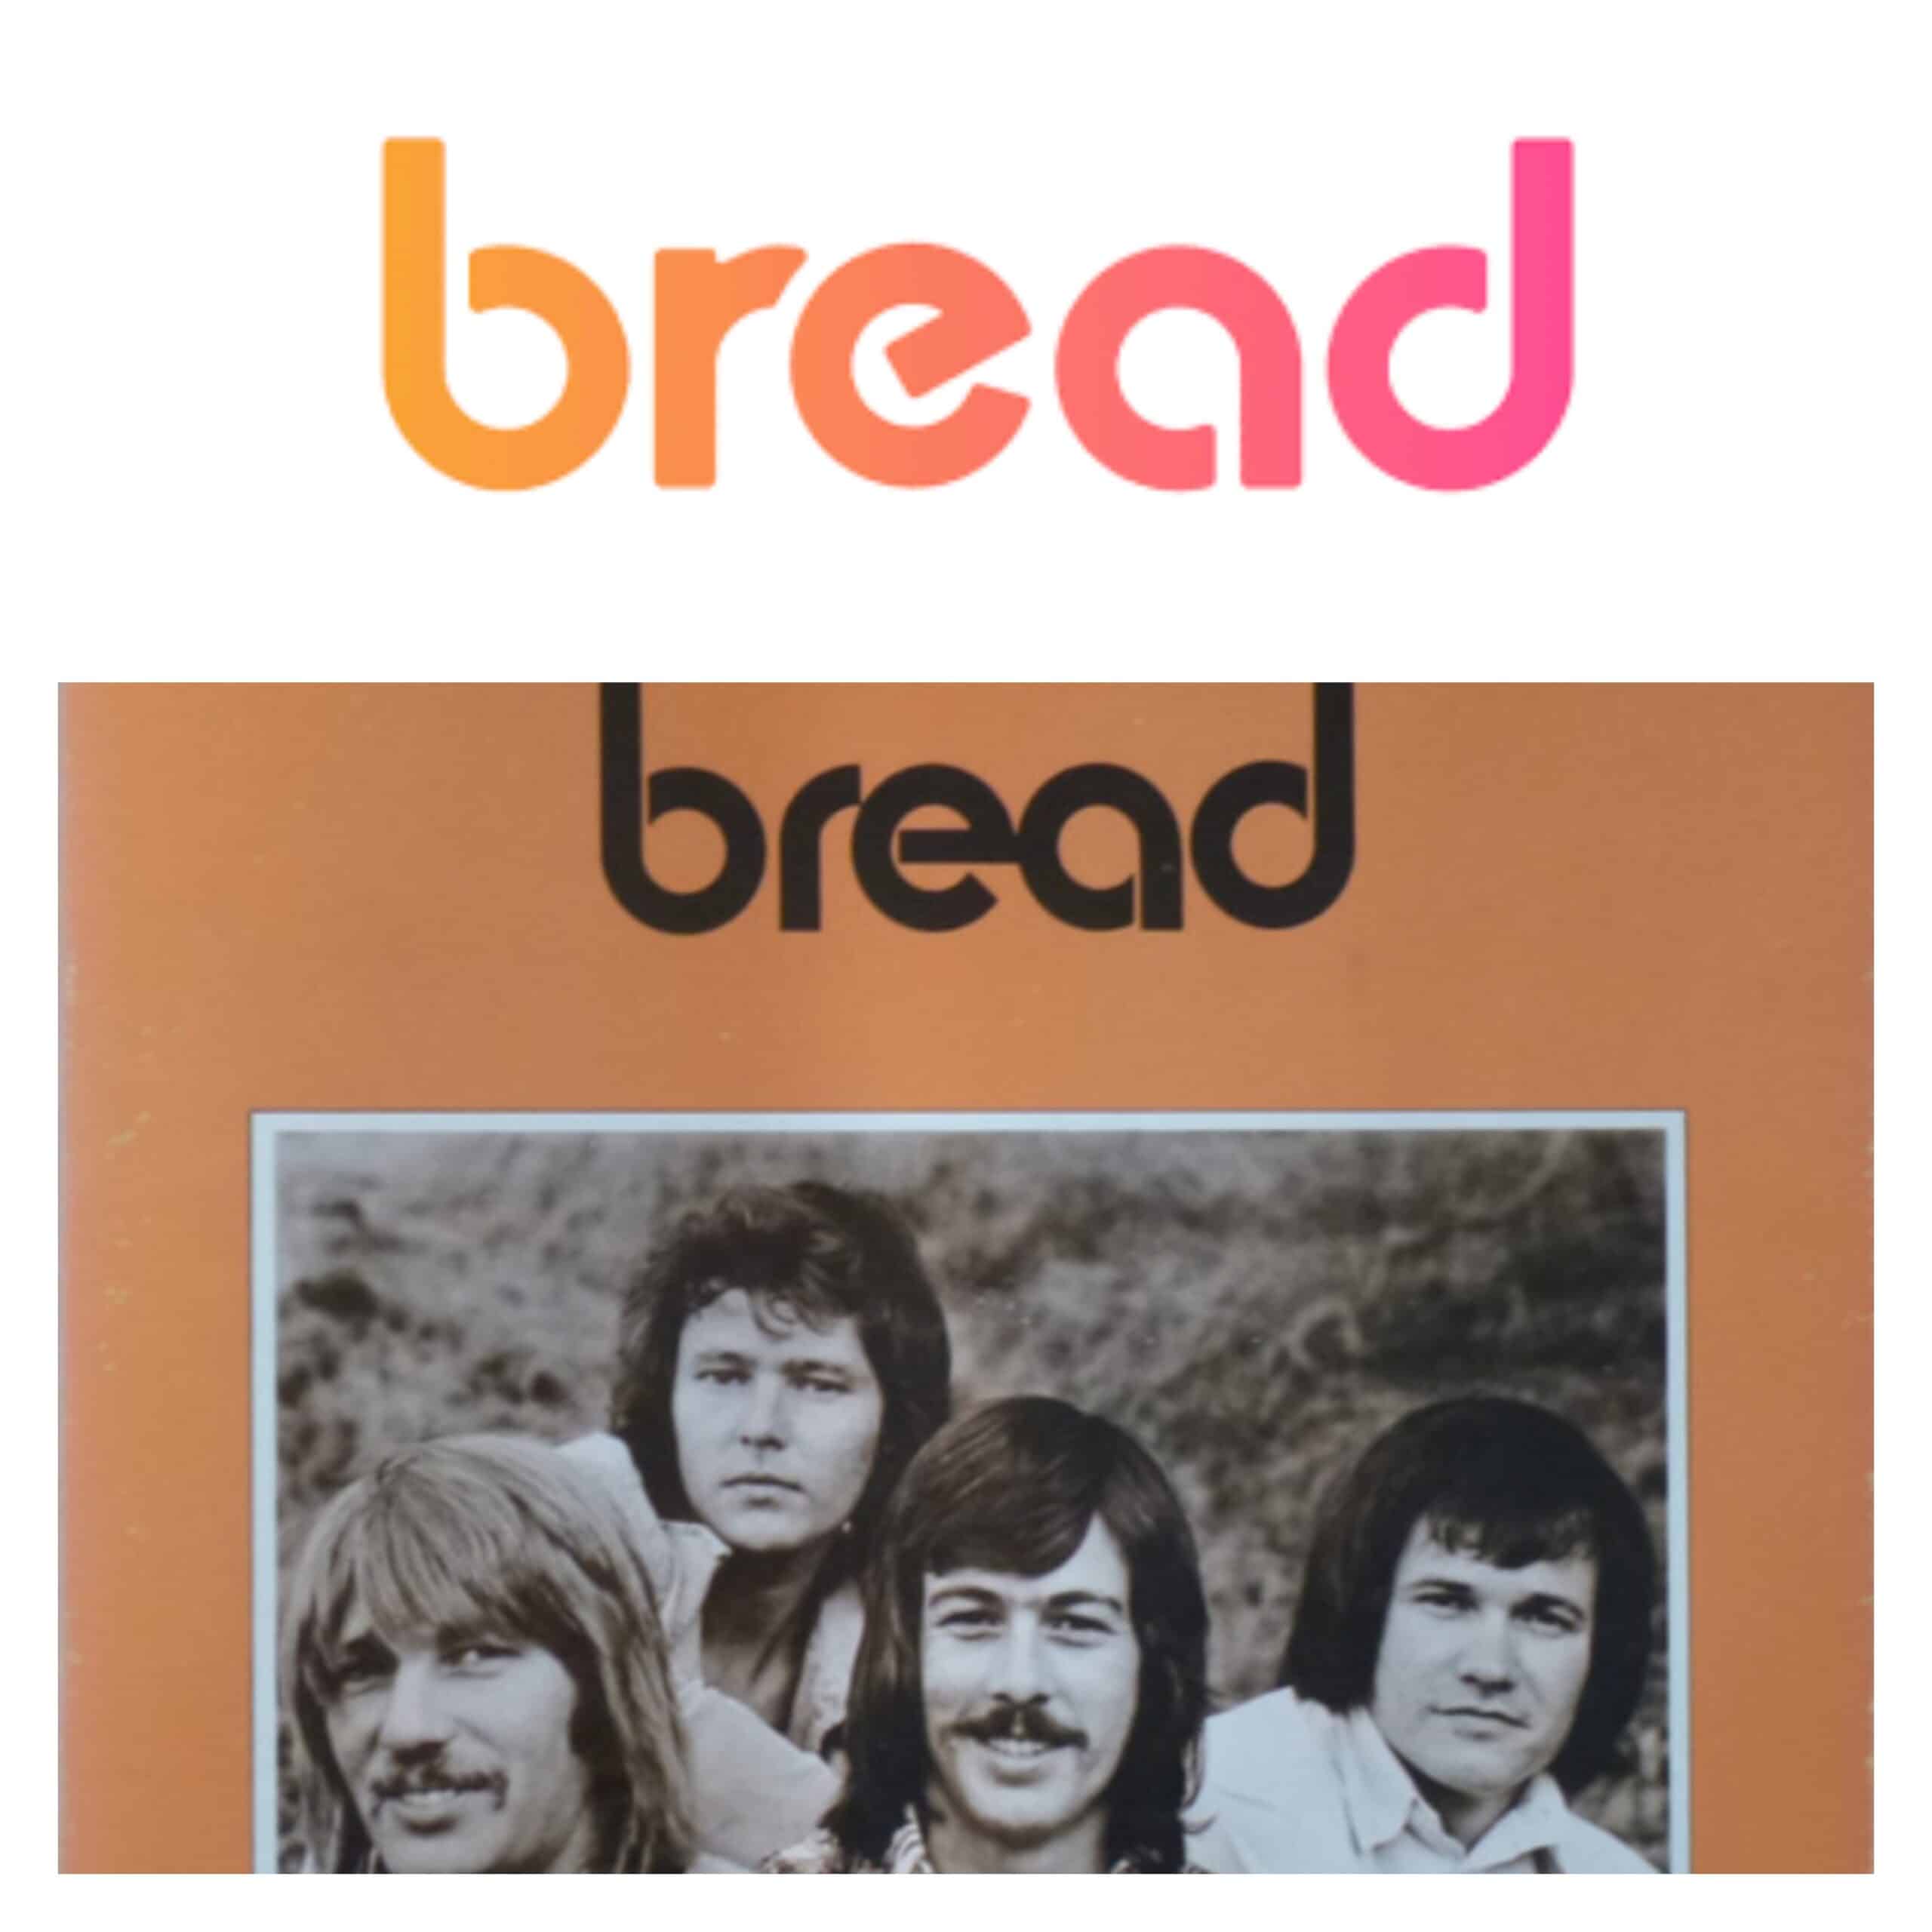 Logos from the bitcoin wallet Bread and the 70s band Bread.